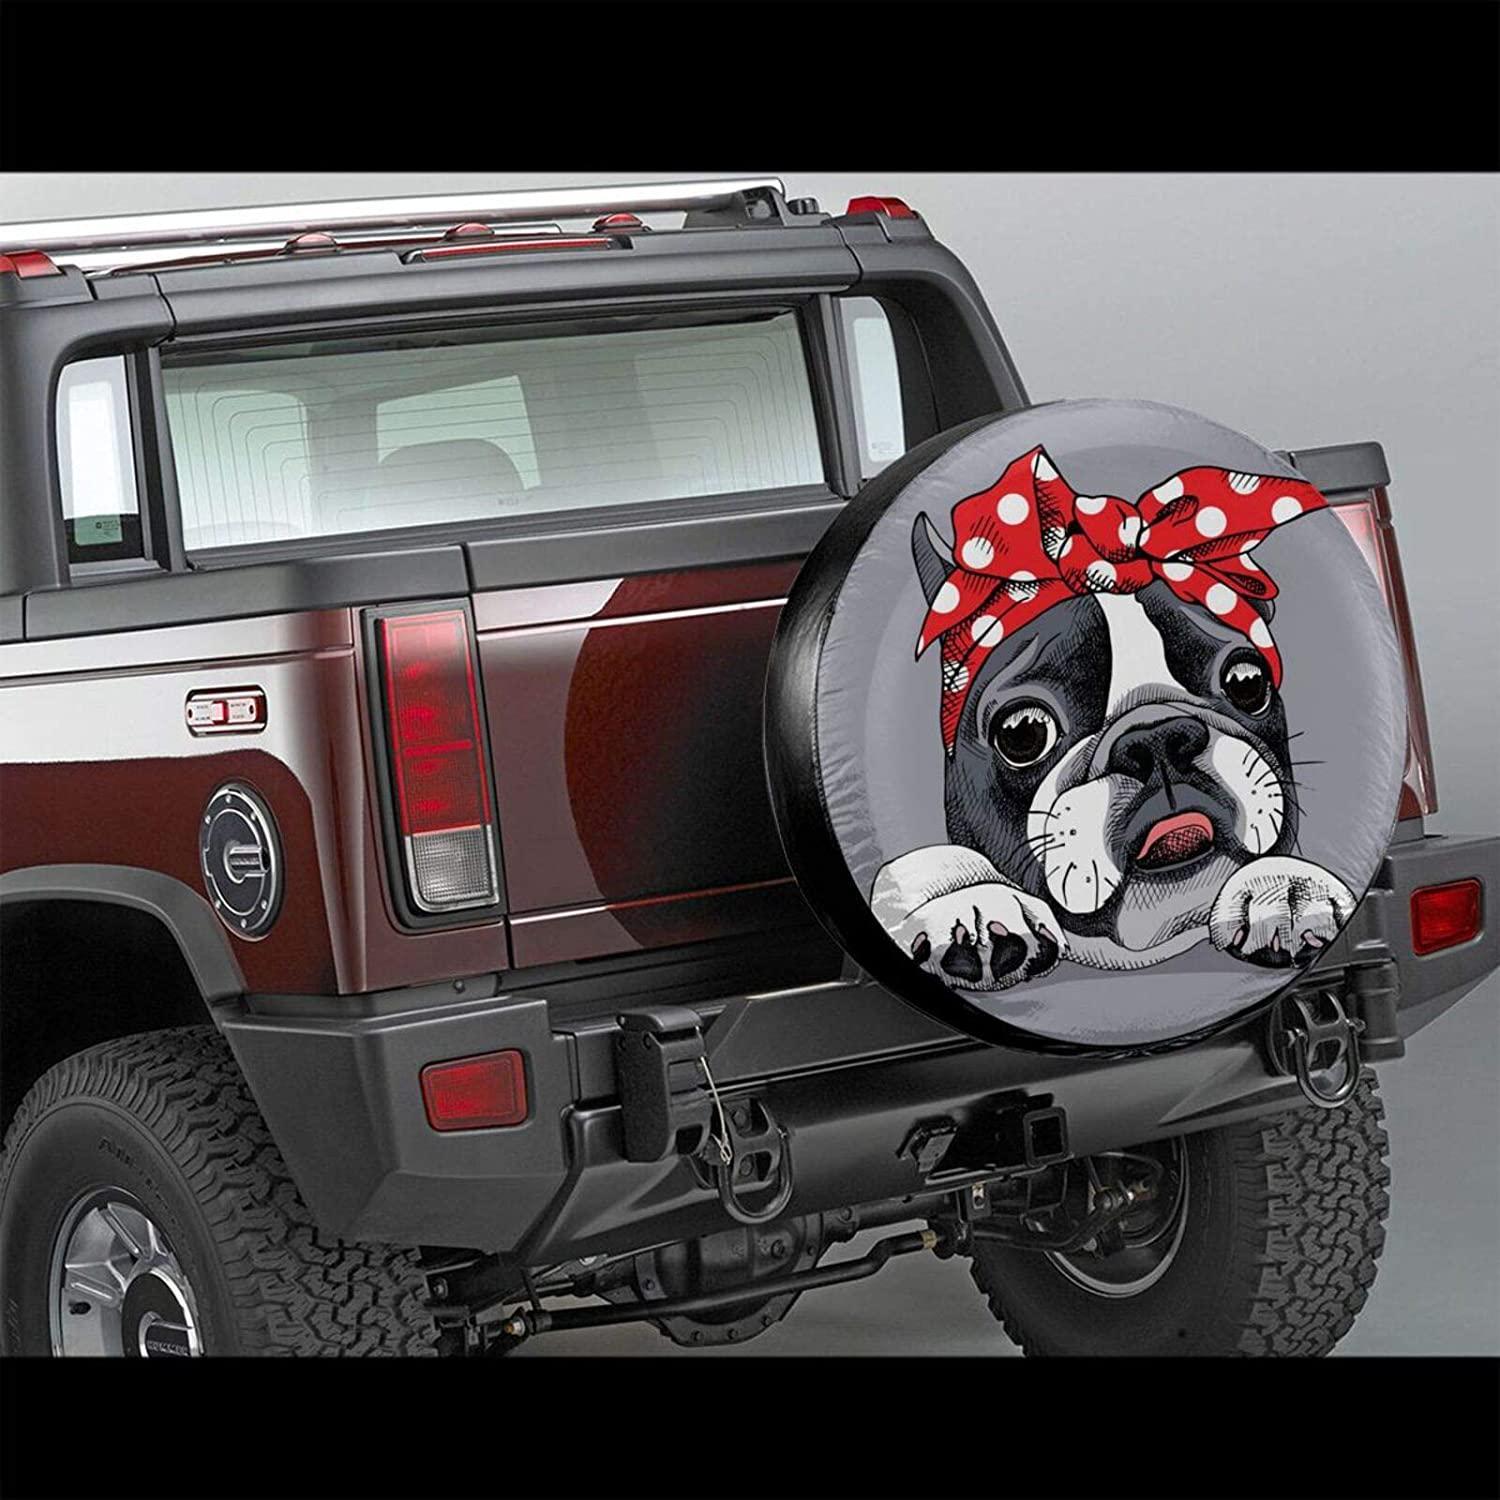 Delerain French Bulldog Spare Tire Covers and 50 similar items